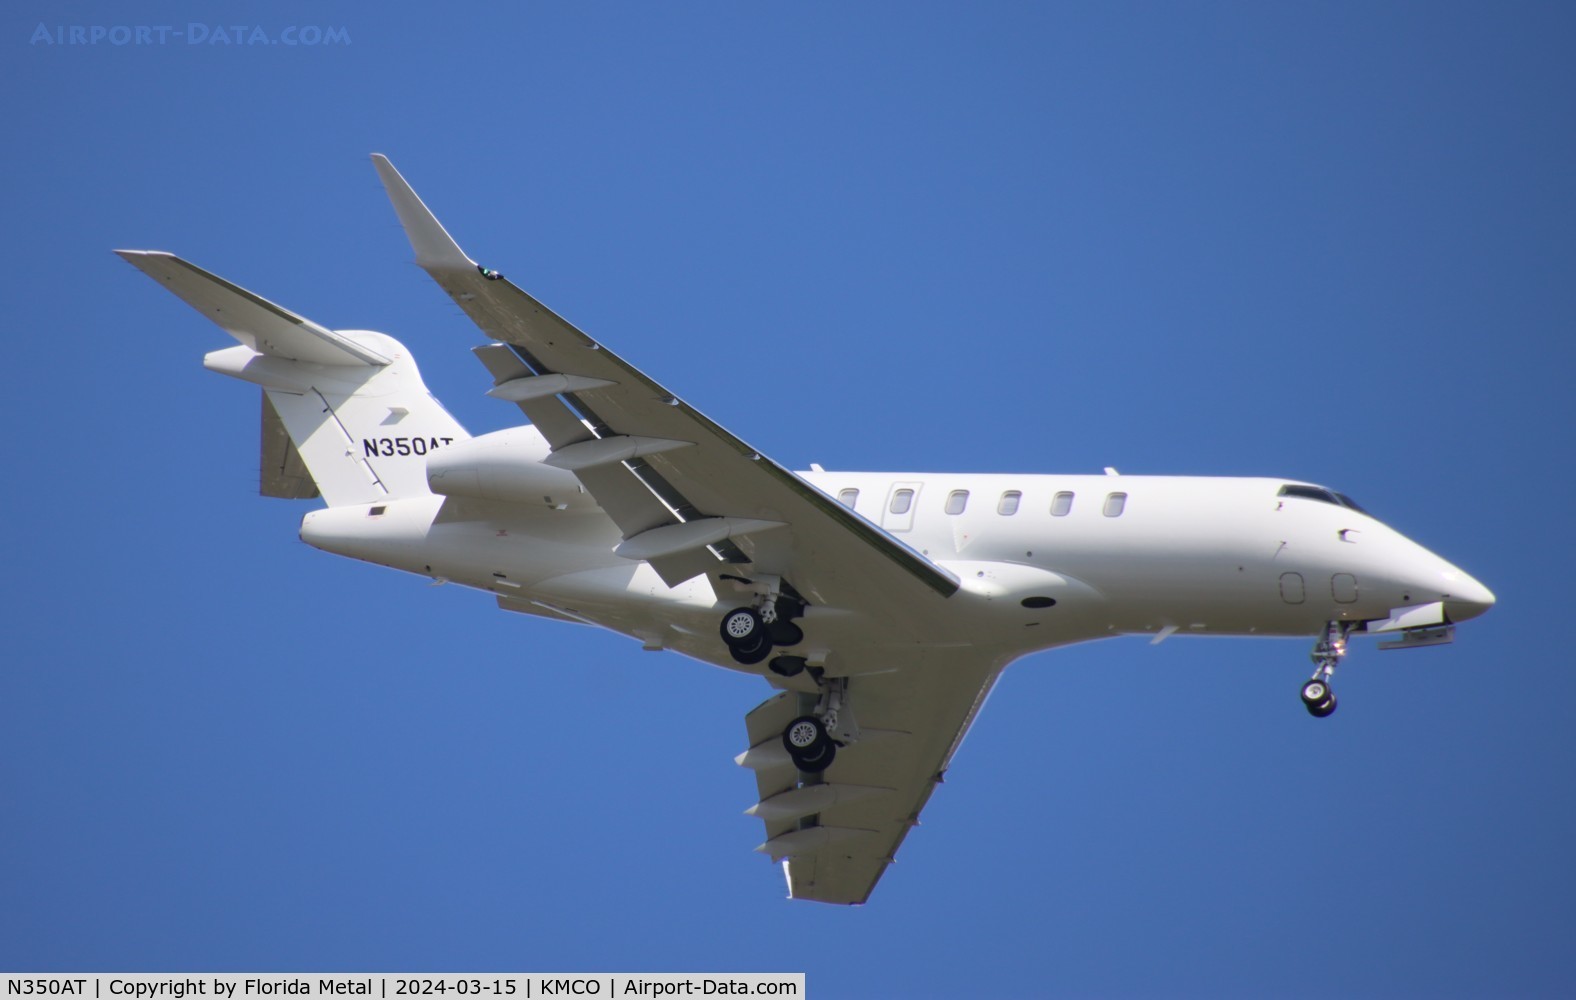 N350AT, 2018 Bombardier Challenger 350 (BD-100-1A10) C/N 20795, Challenger 350 zx